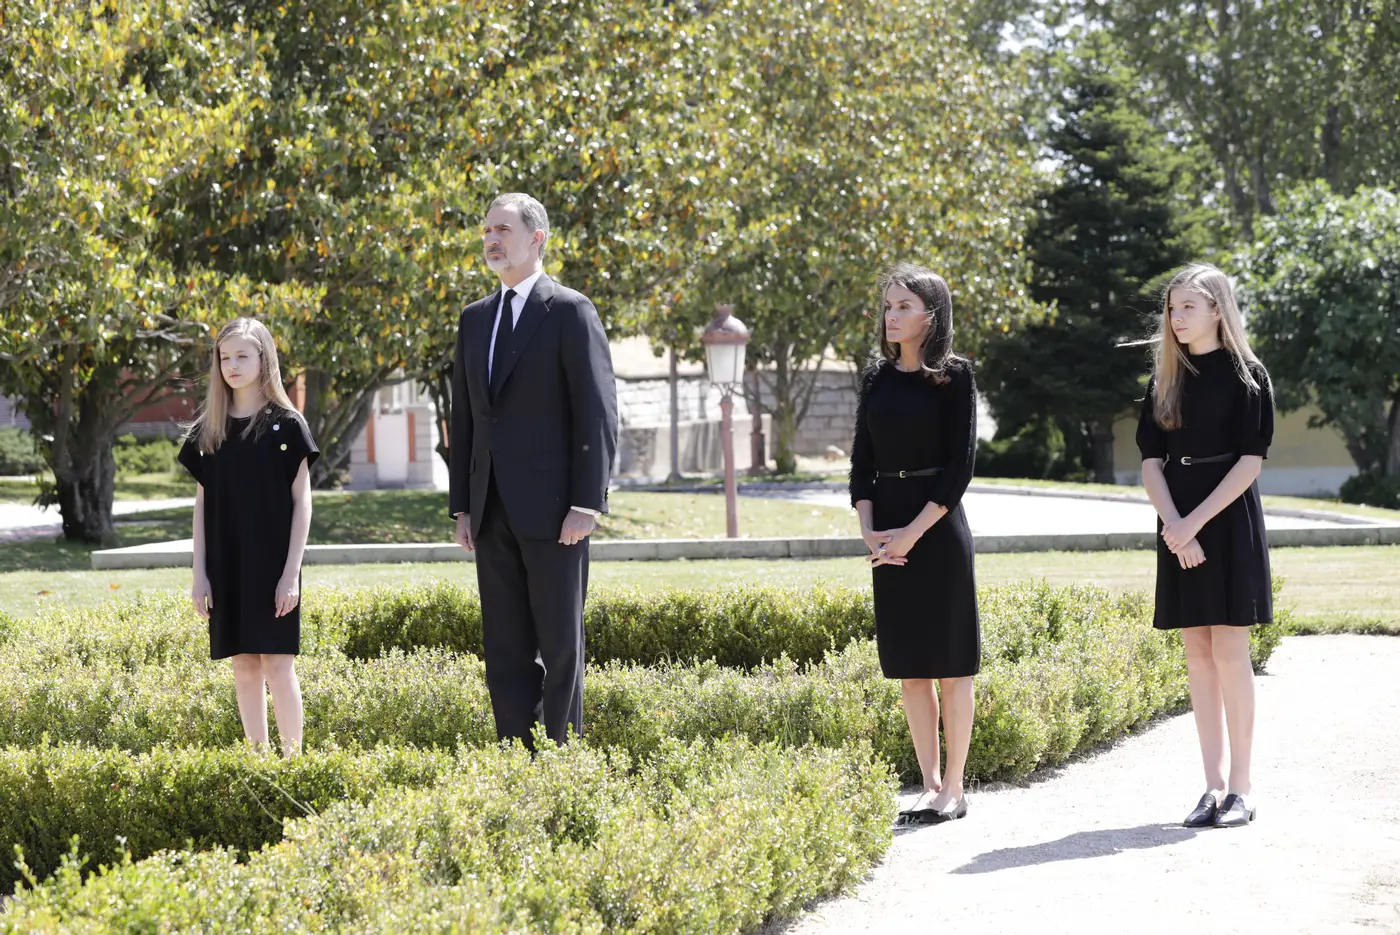 Spanish Royal Family paid tribute to the victims of COVID-19